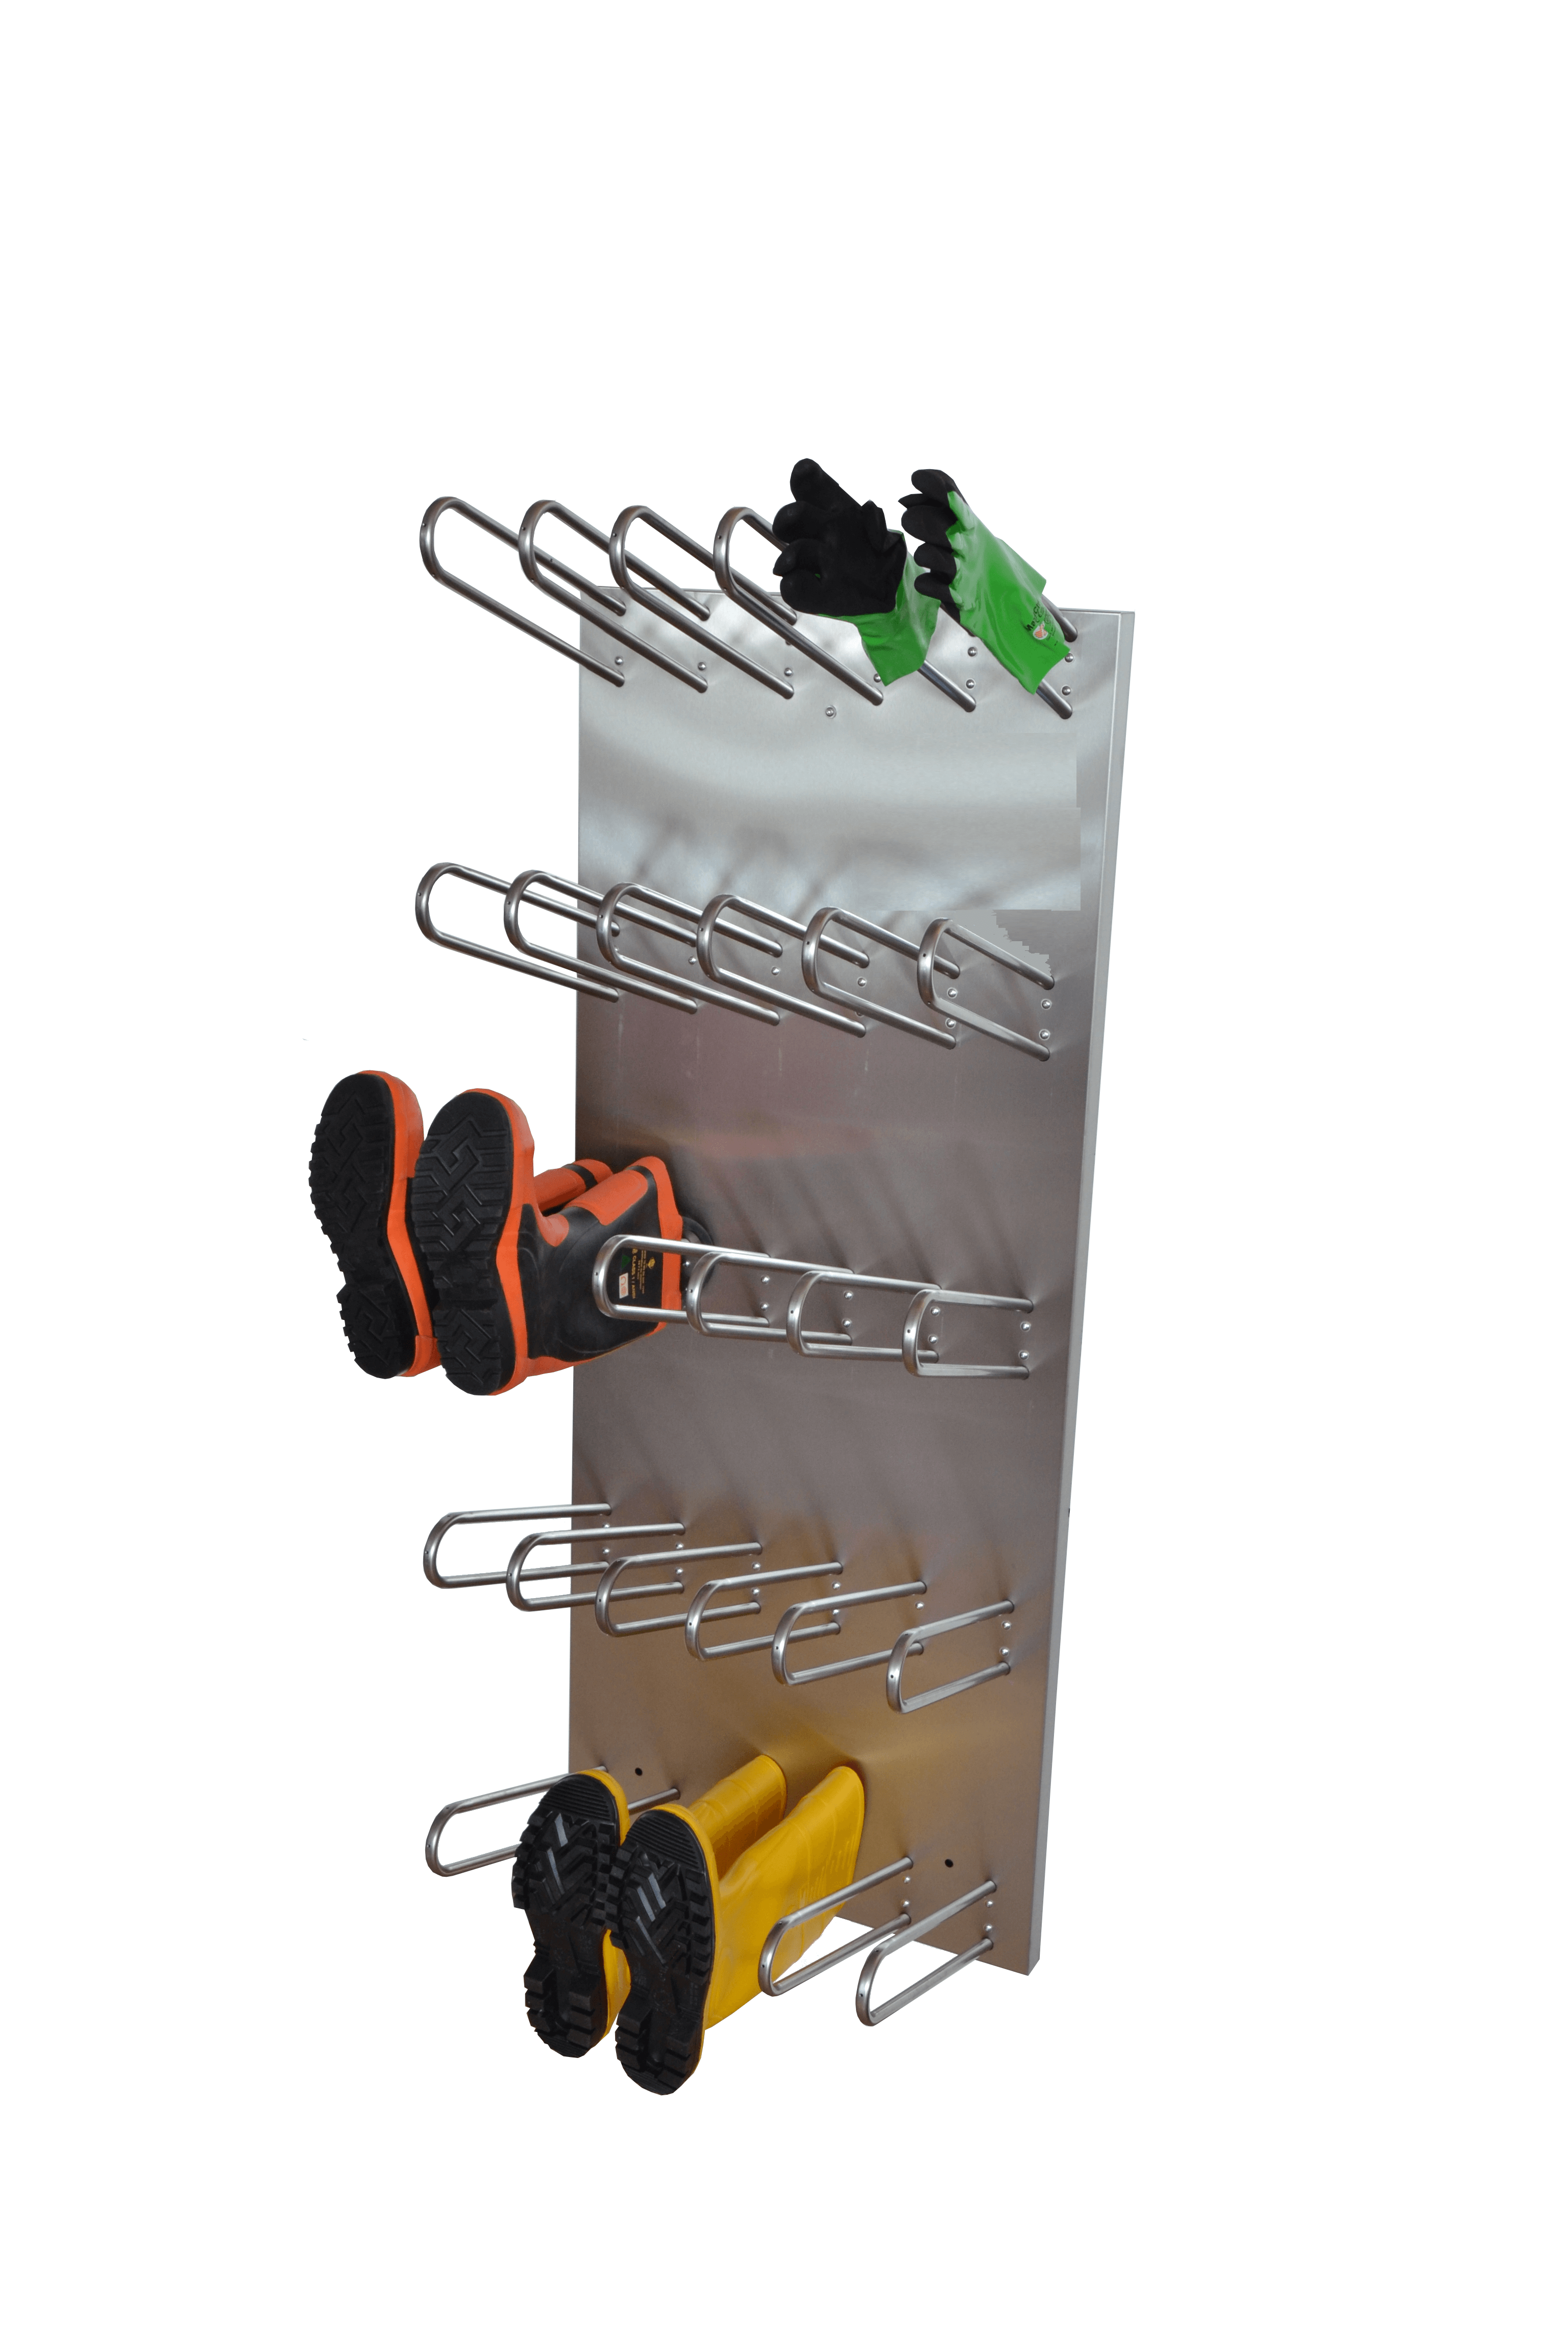 Electrical professional drying system for boots, shoes and gloves